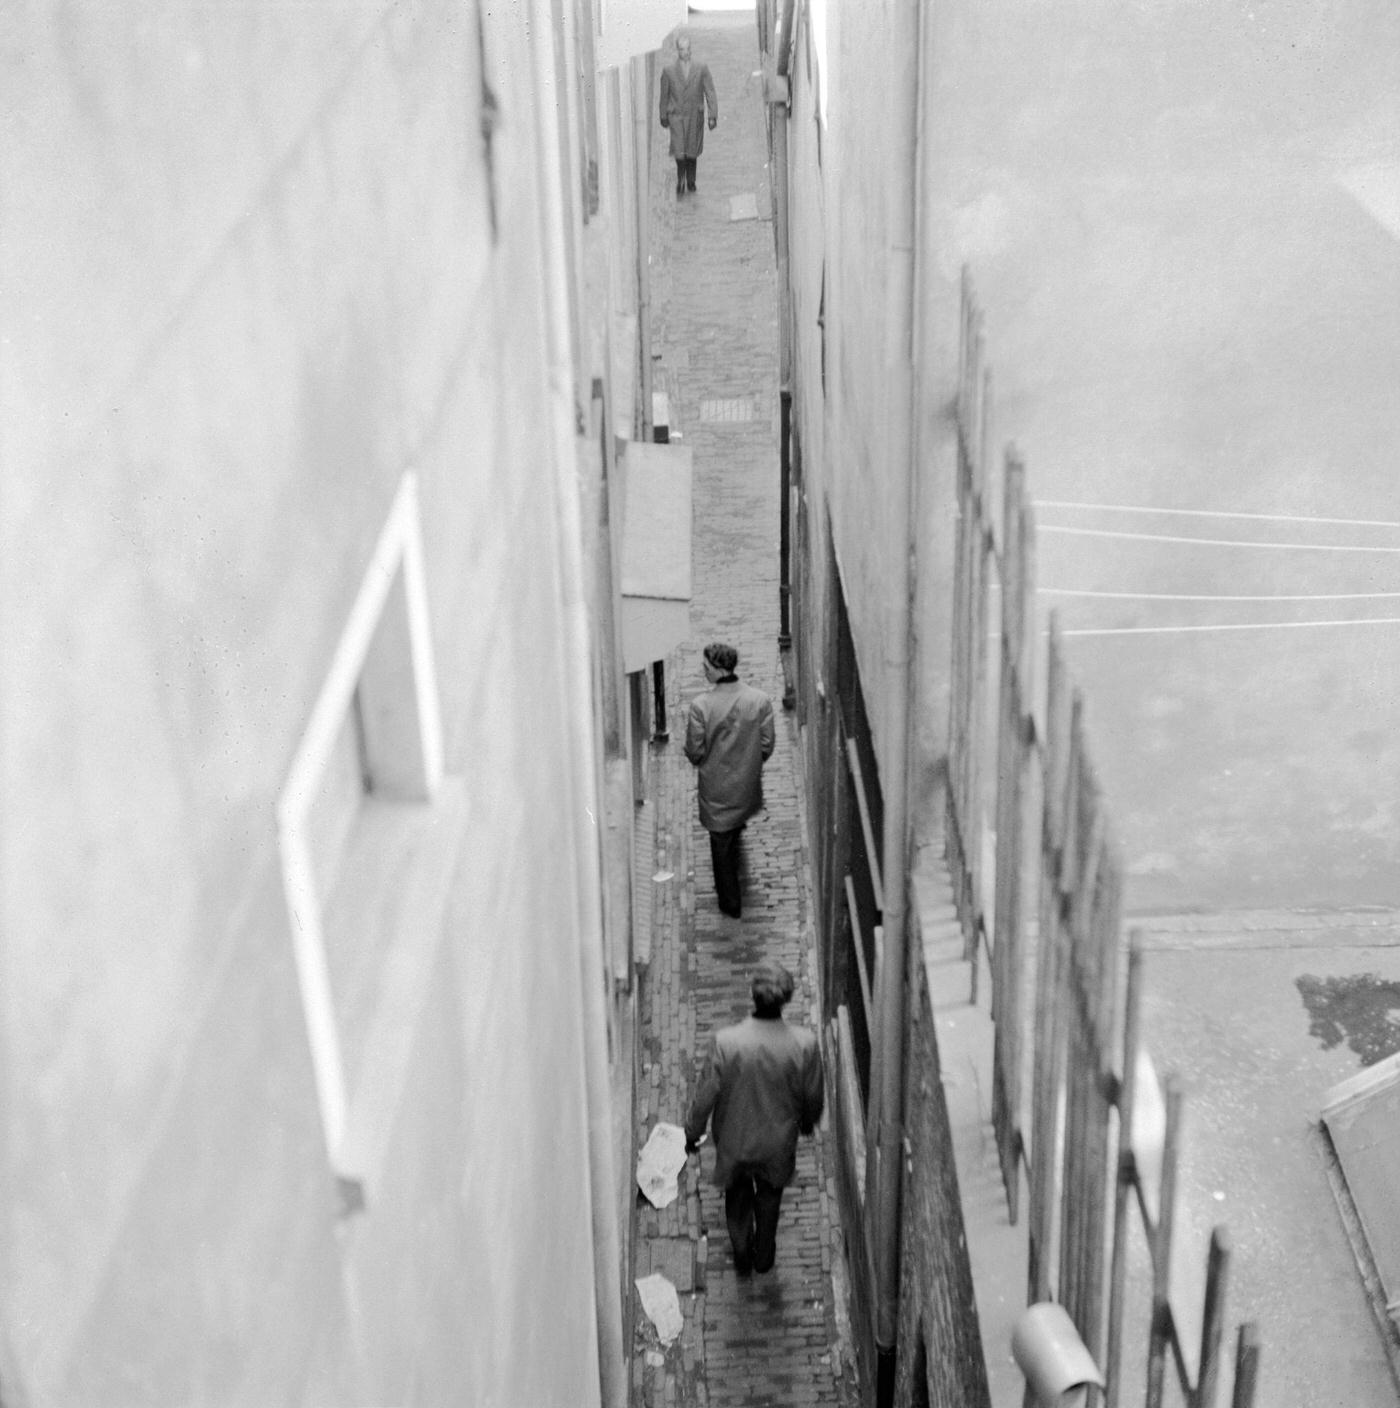 Men walking down a narrow alley in the Netherlands, circa 1956.